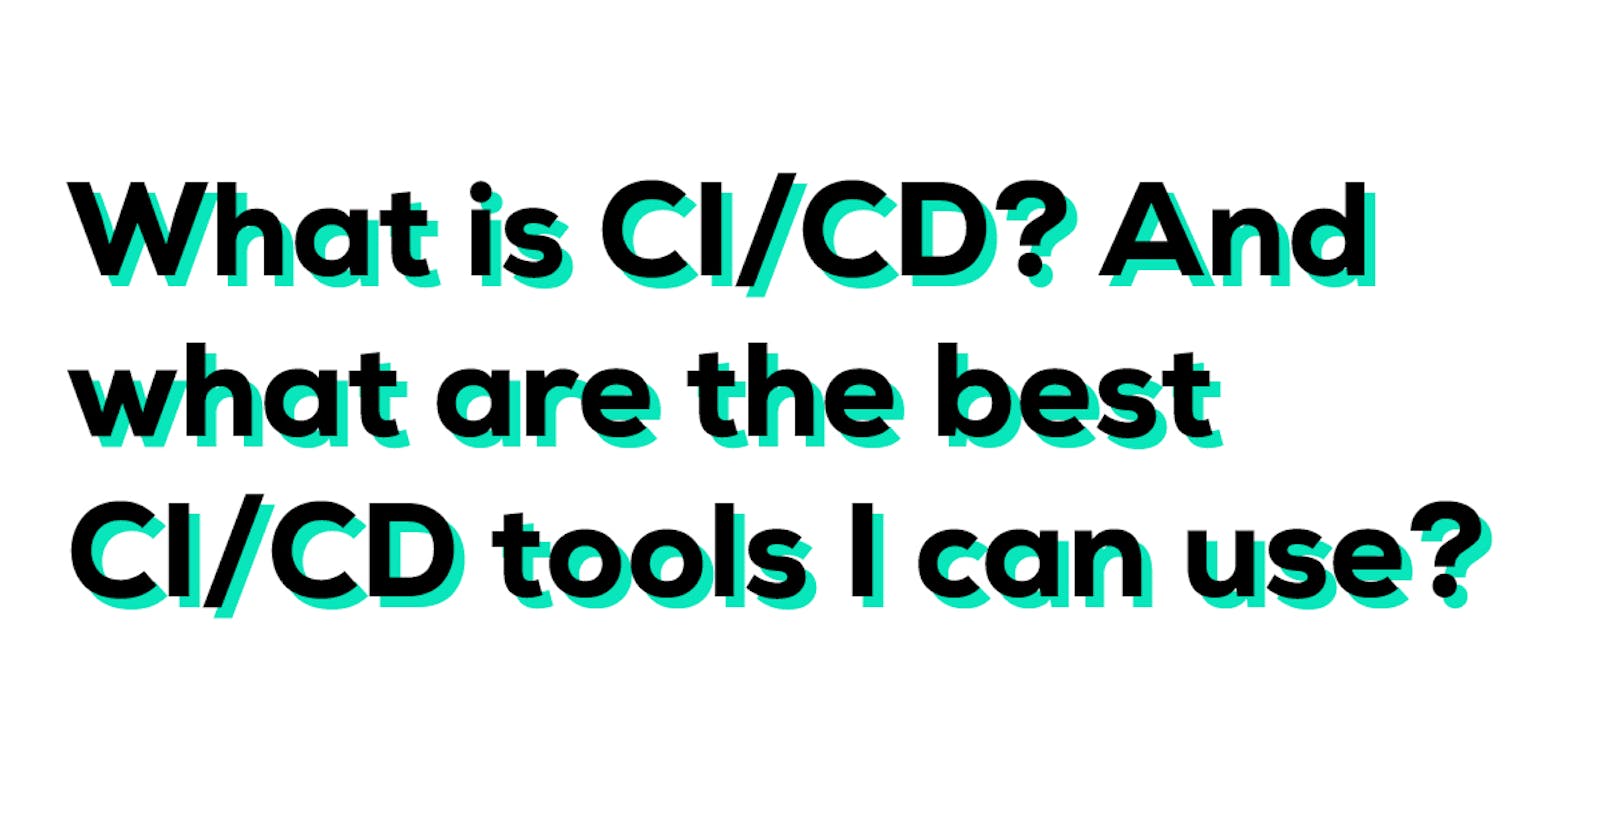 What is CI/CD? And what are the best CI/CD tools for your website?